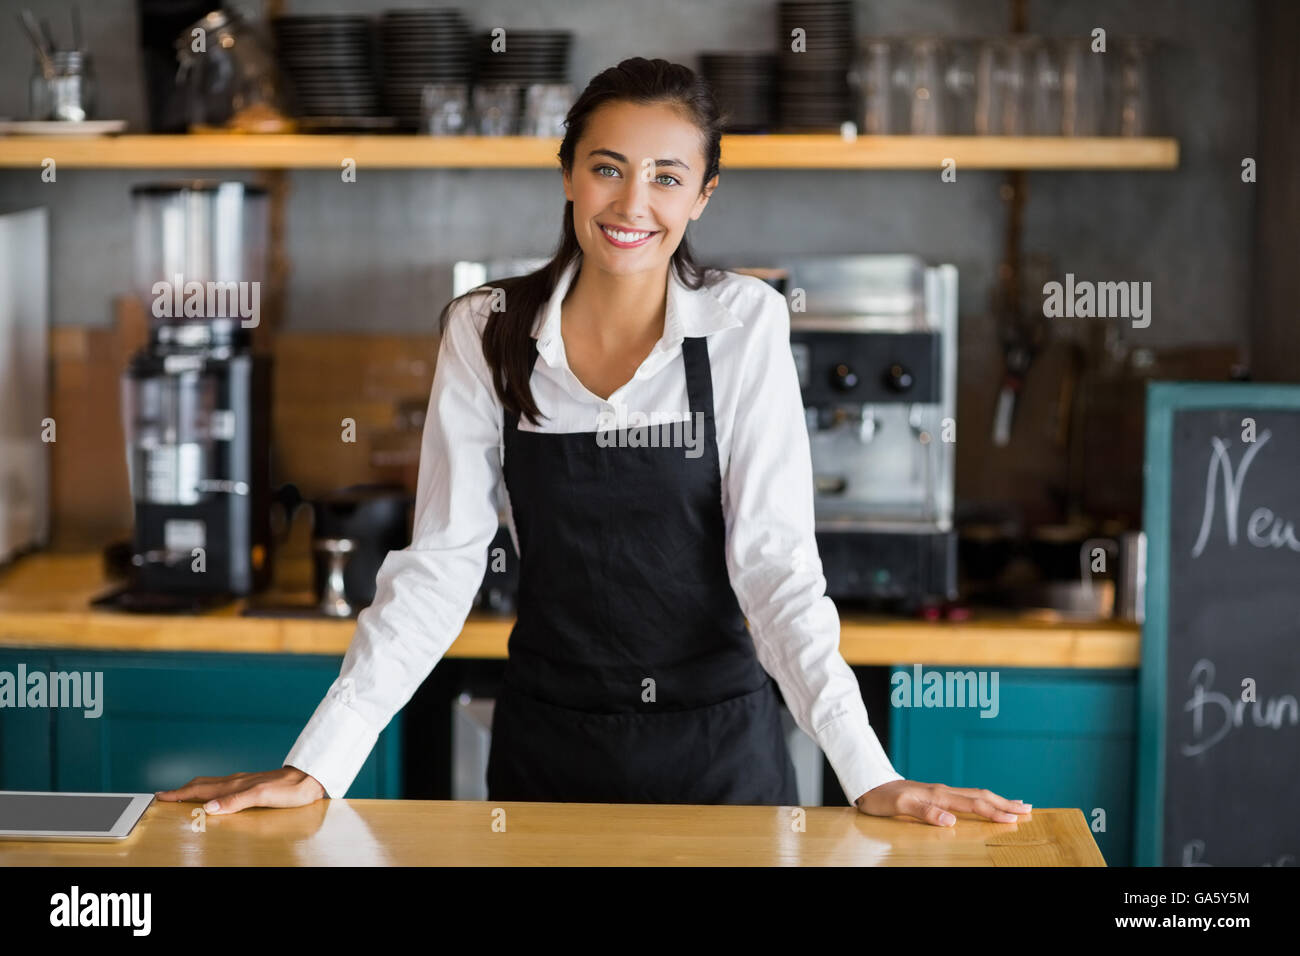 Portrait of smiling waitress standing at counter Stock Photo